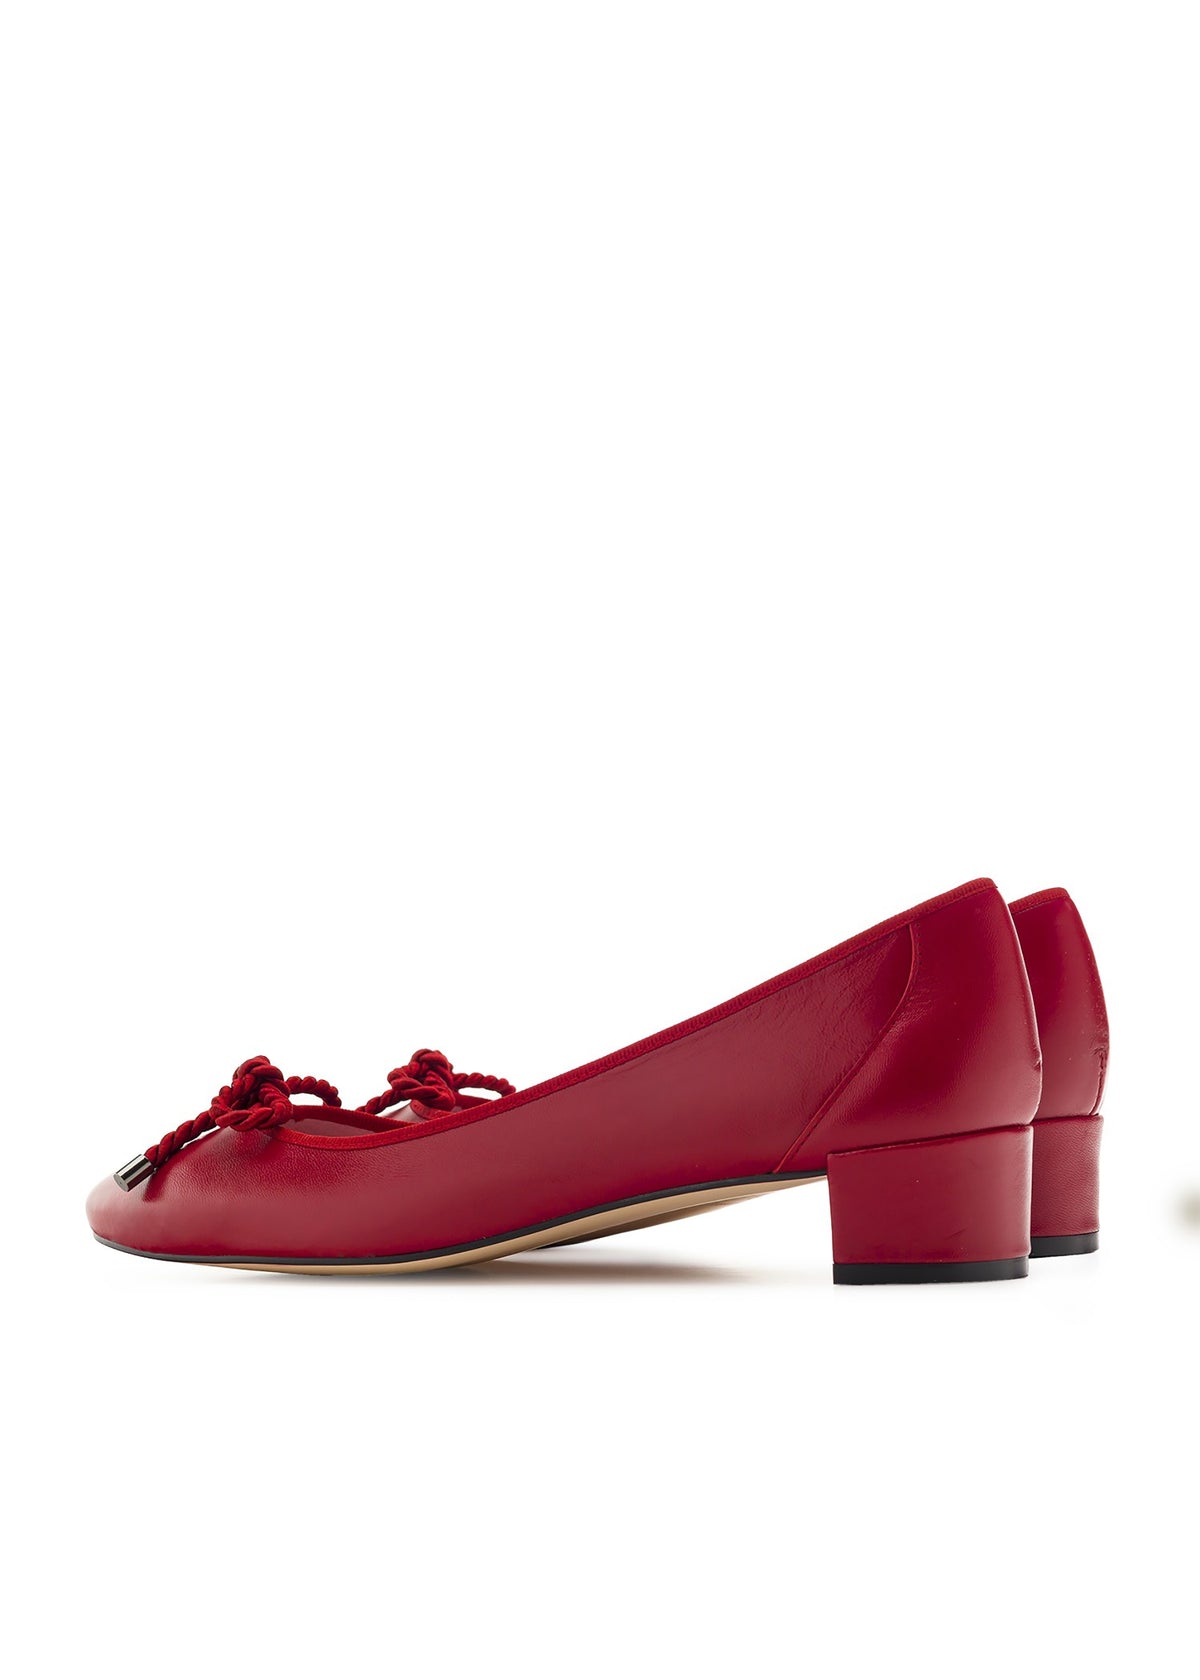 Low open-toe shoes with a studded heel - Lucia, red leather, bow decoration